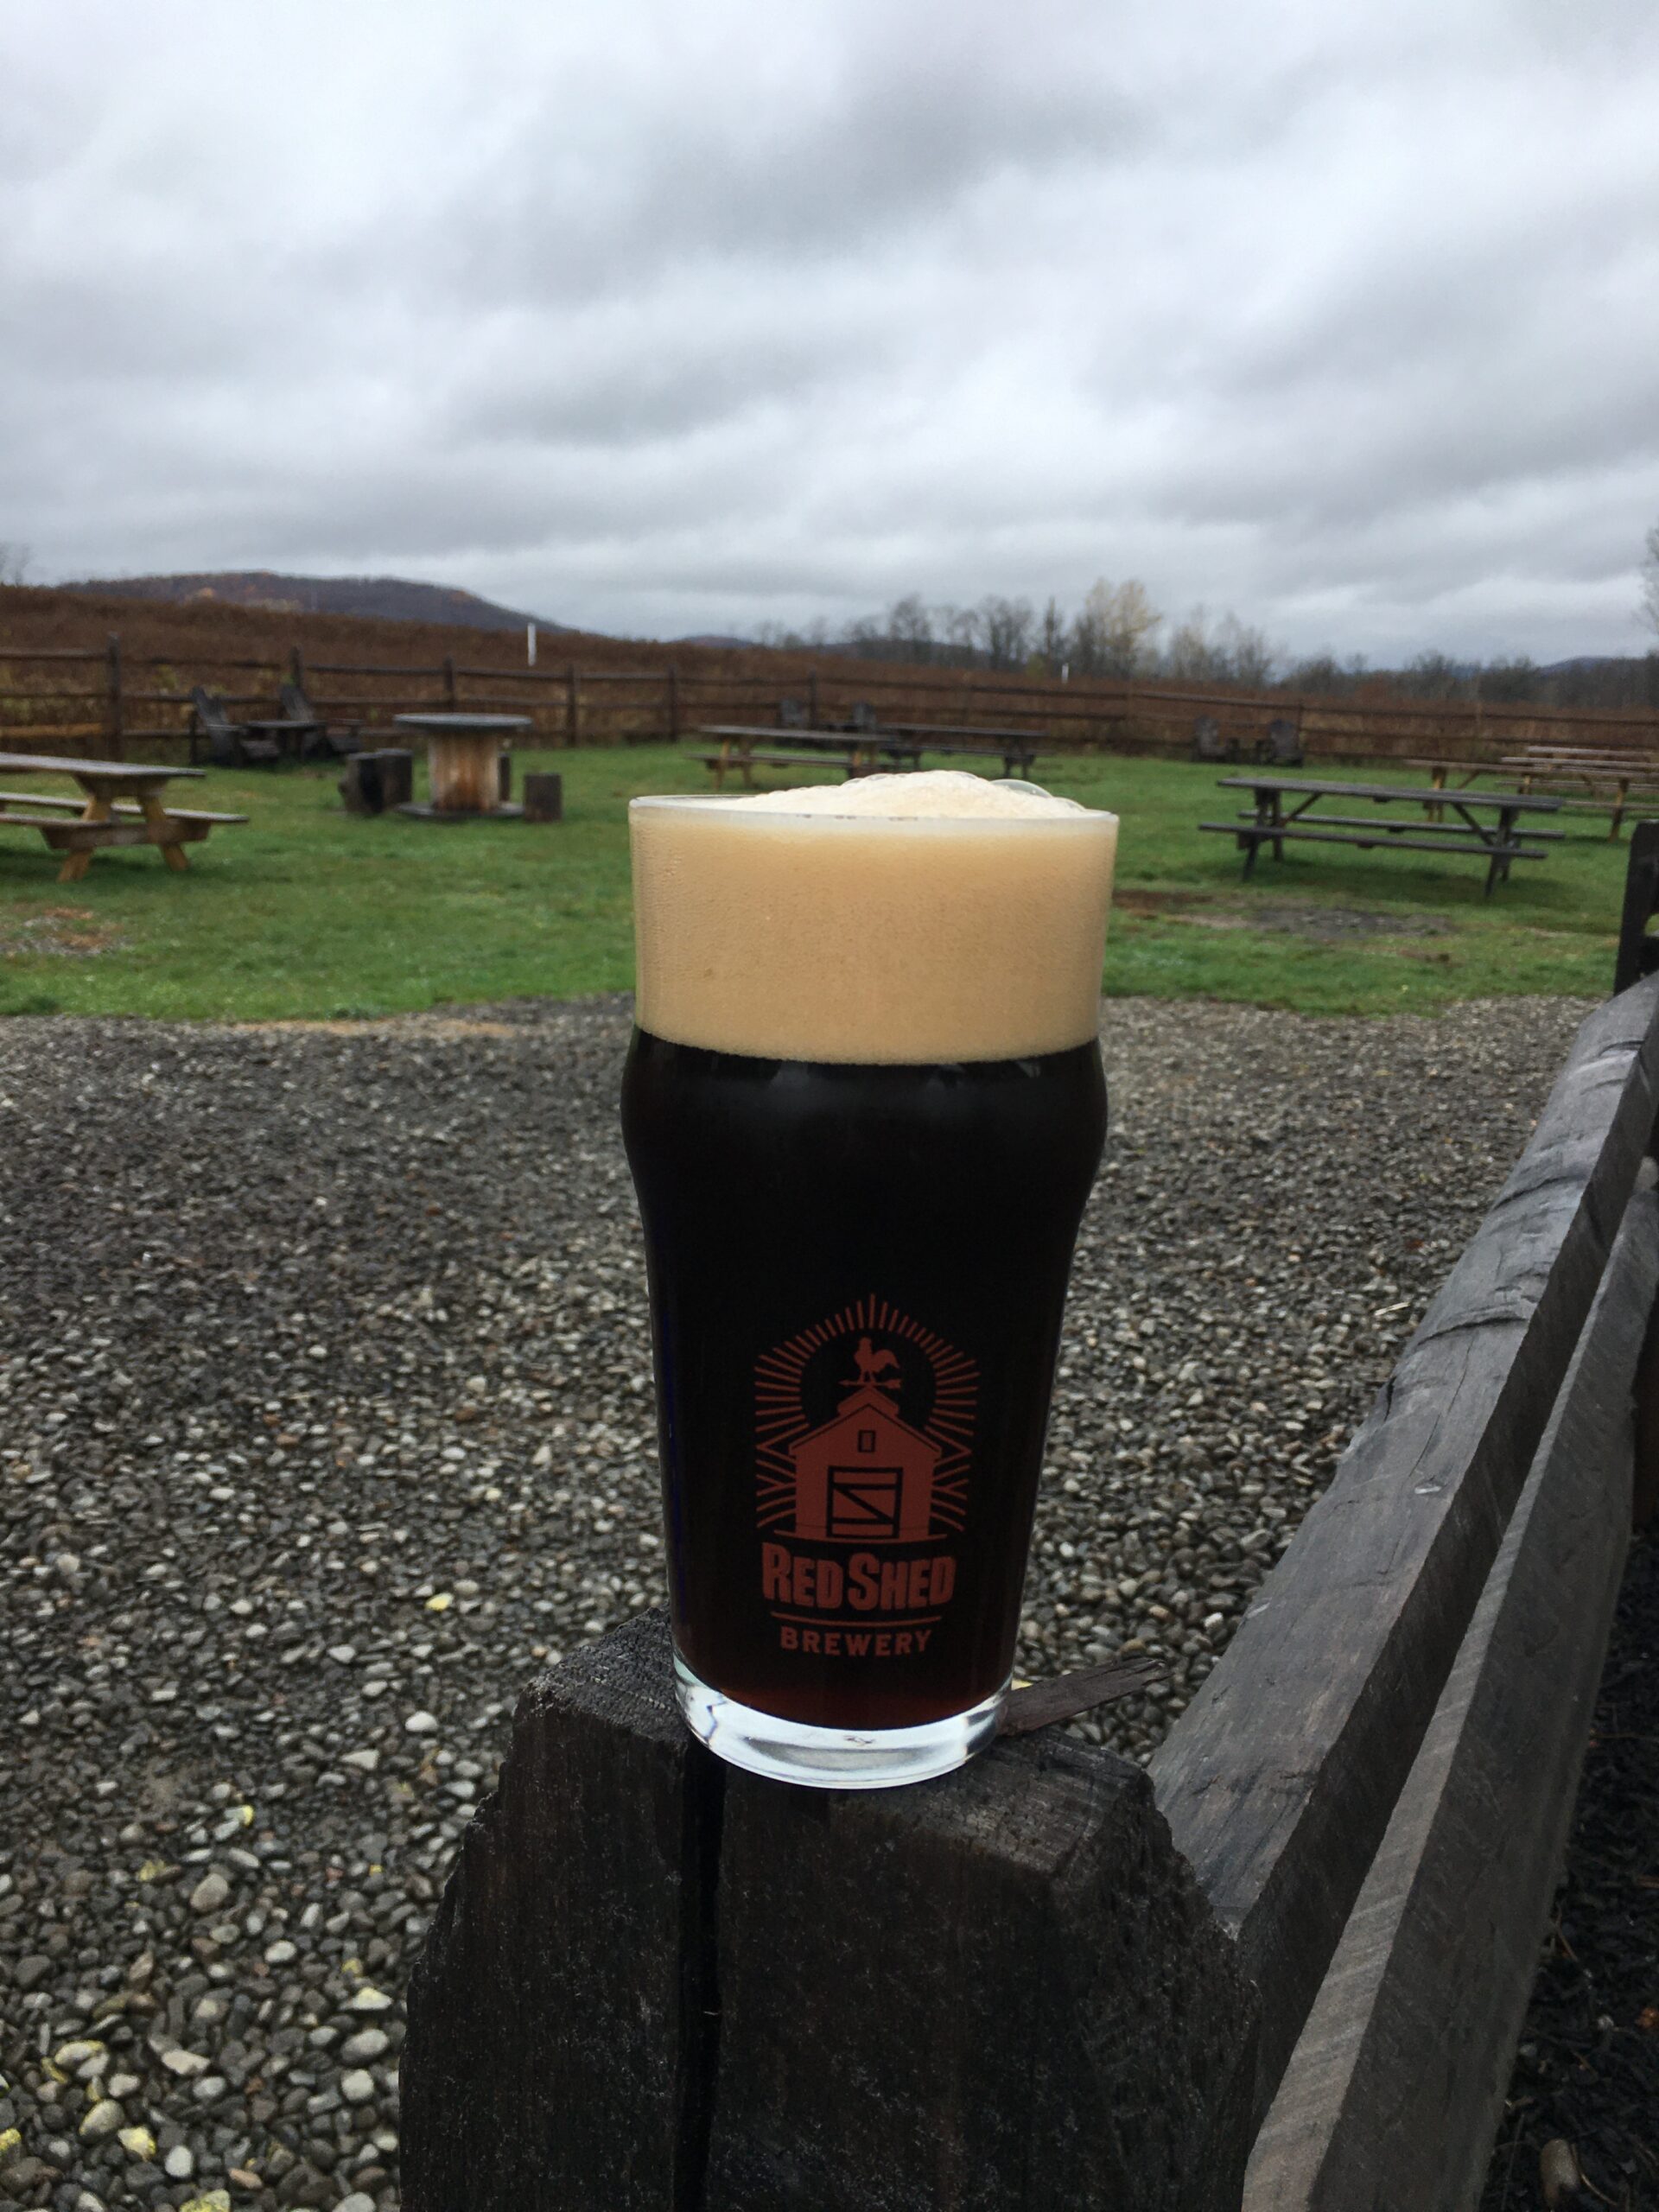 Cherry Valley Smoked Porter, Red Shed Brewing